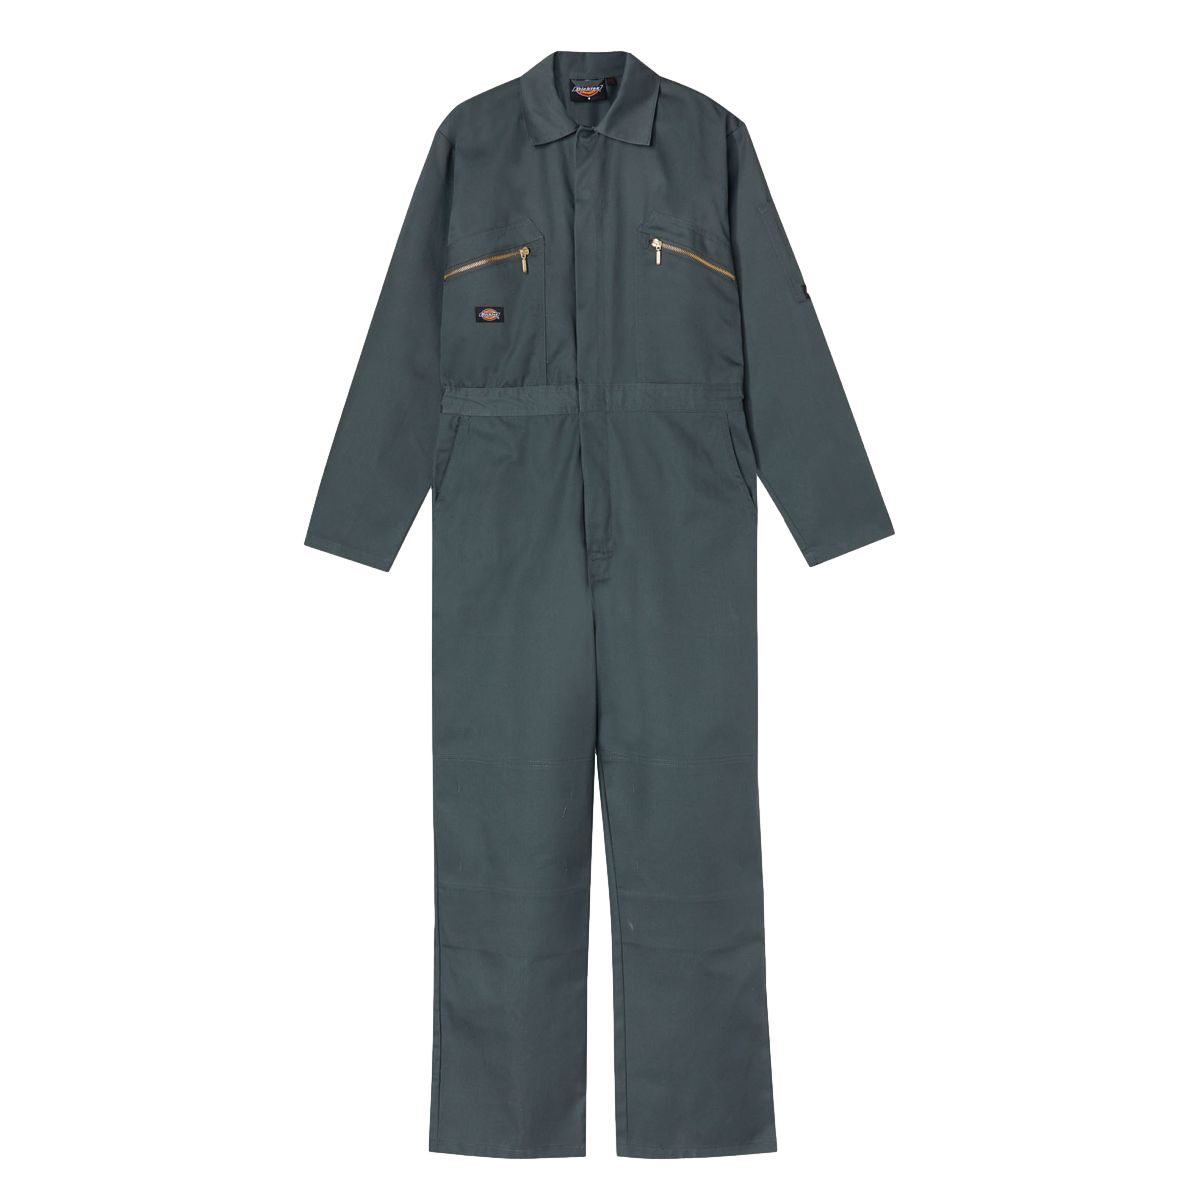 Combinaison Redhawk Coverhall Vert - Dickies - Taille XL 0